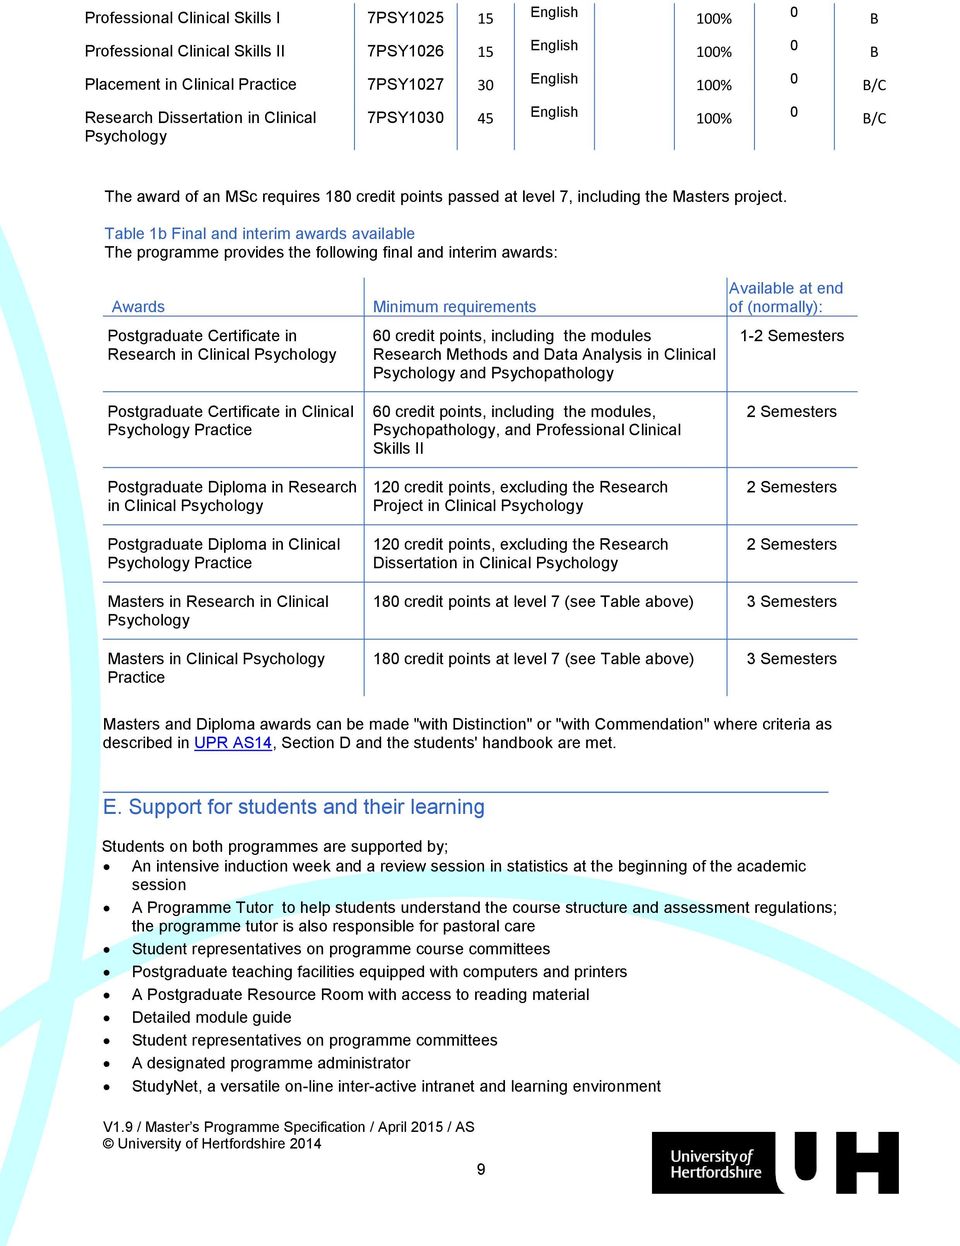 Table 1b Final and interim awards available The programme provides the following final and interim awards: Awards Postgraduate Certificate in Research in Clinical Psychology Postgraduate Certificate